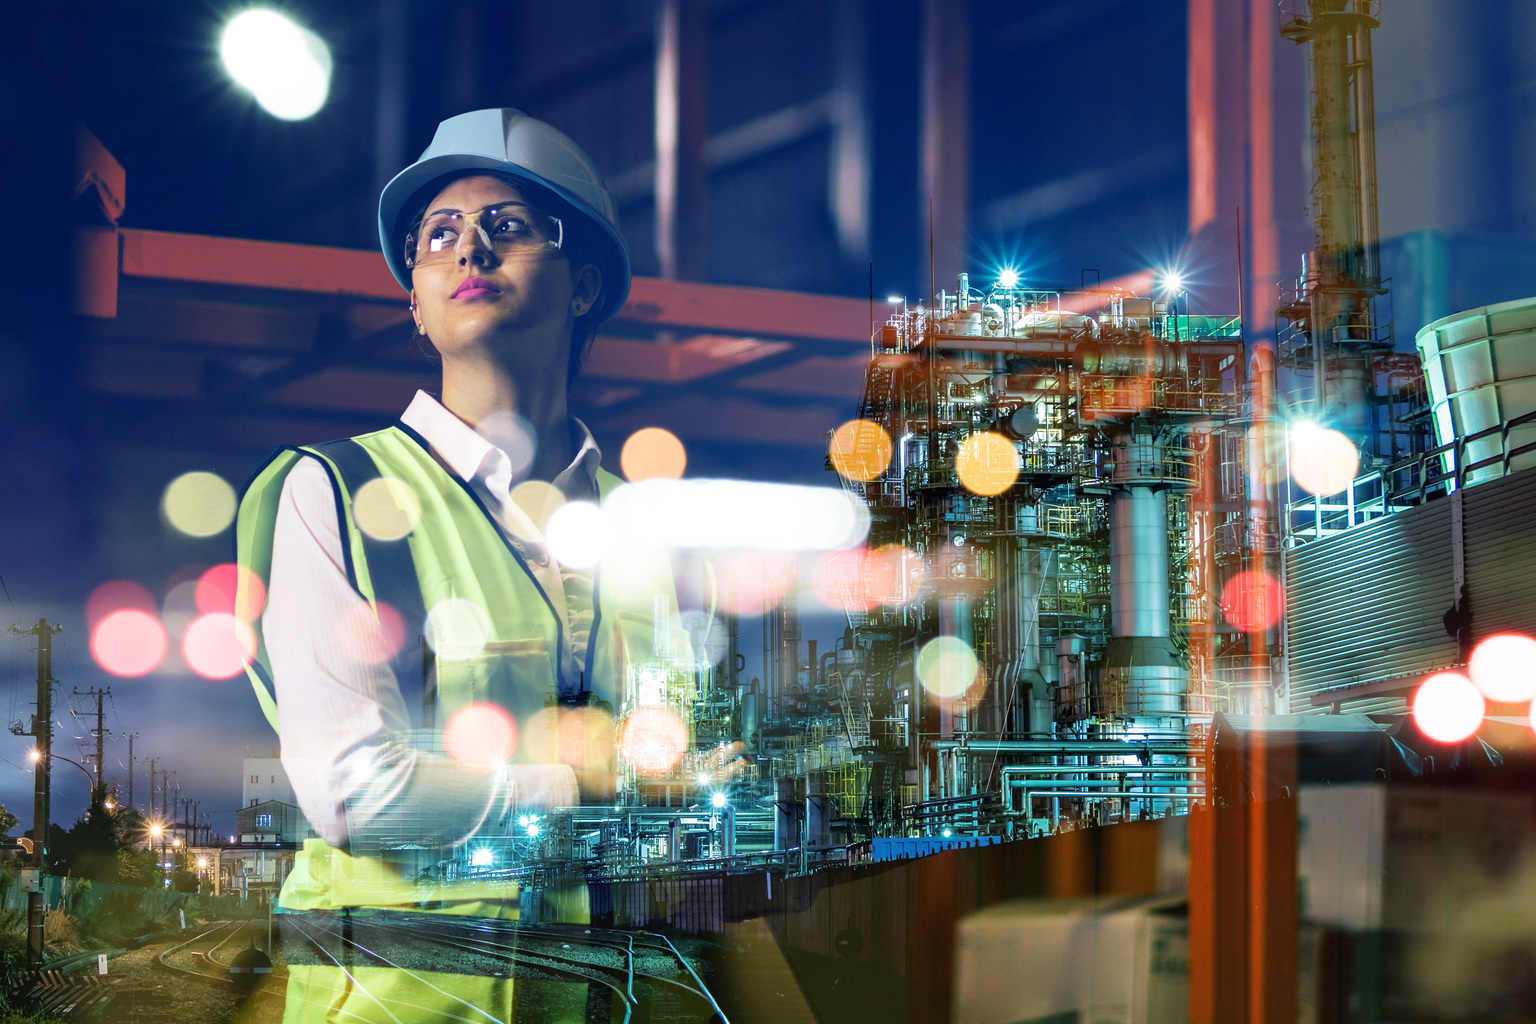 Engineer woman working late night with plant on background